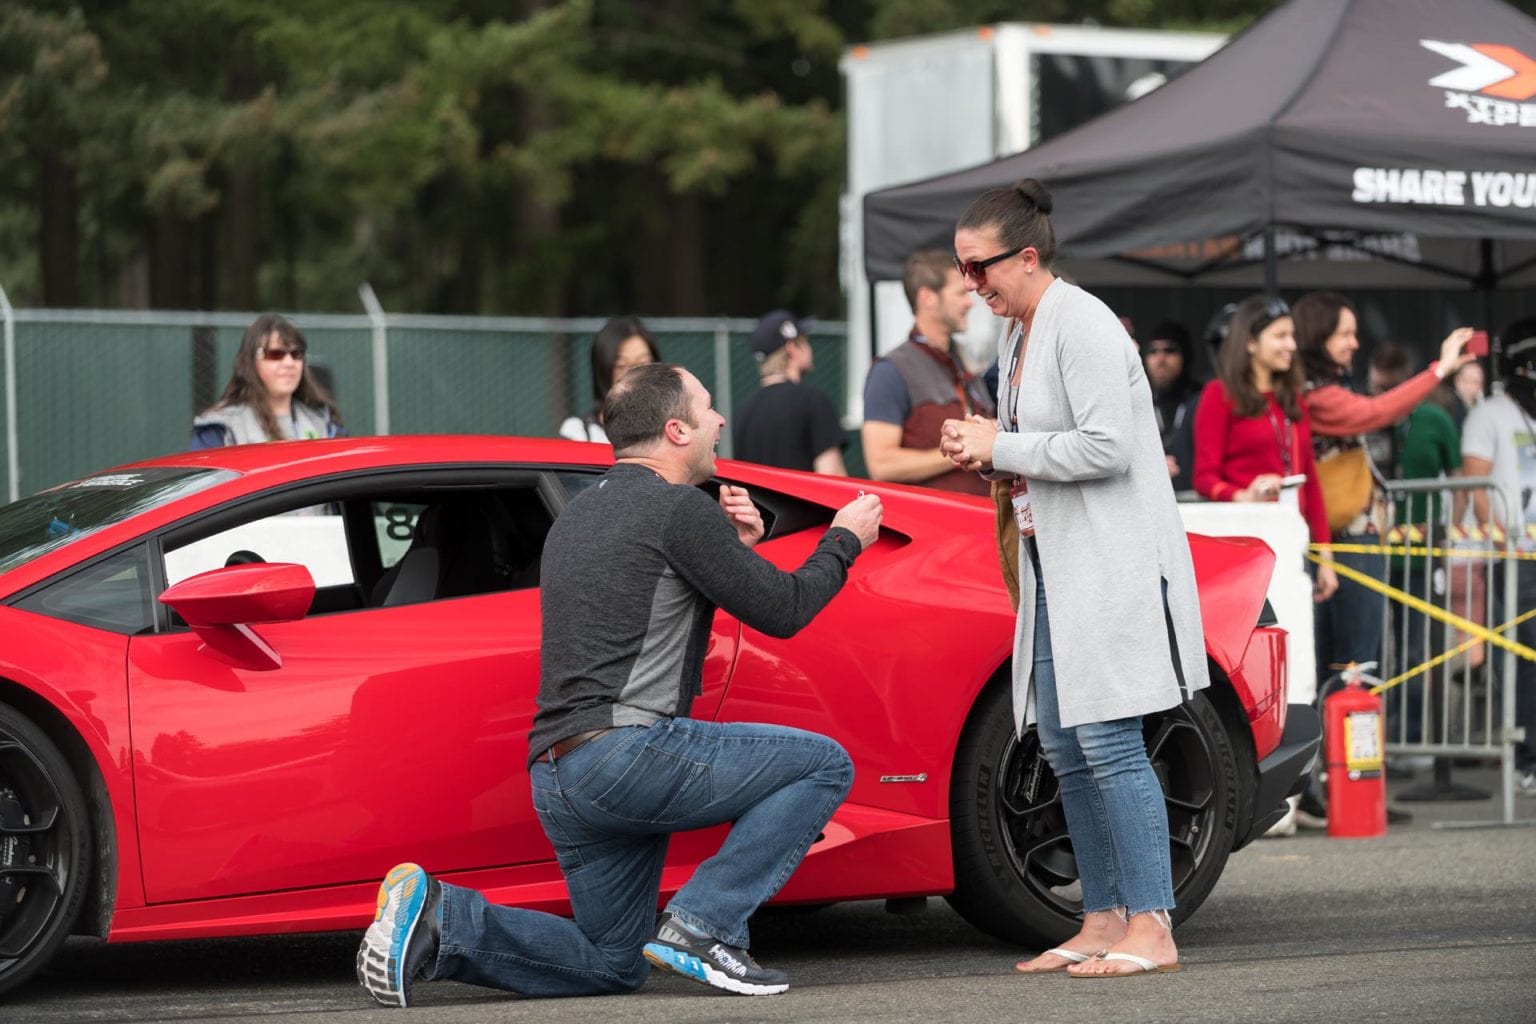 engagement on the racetrack